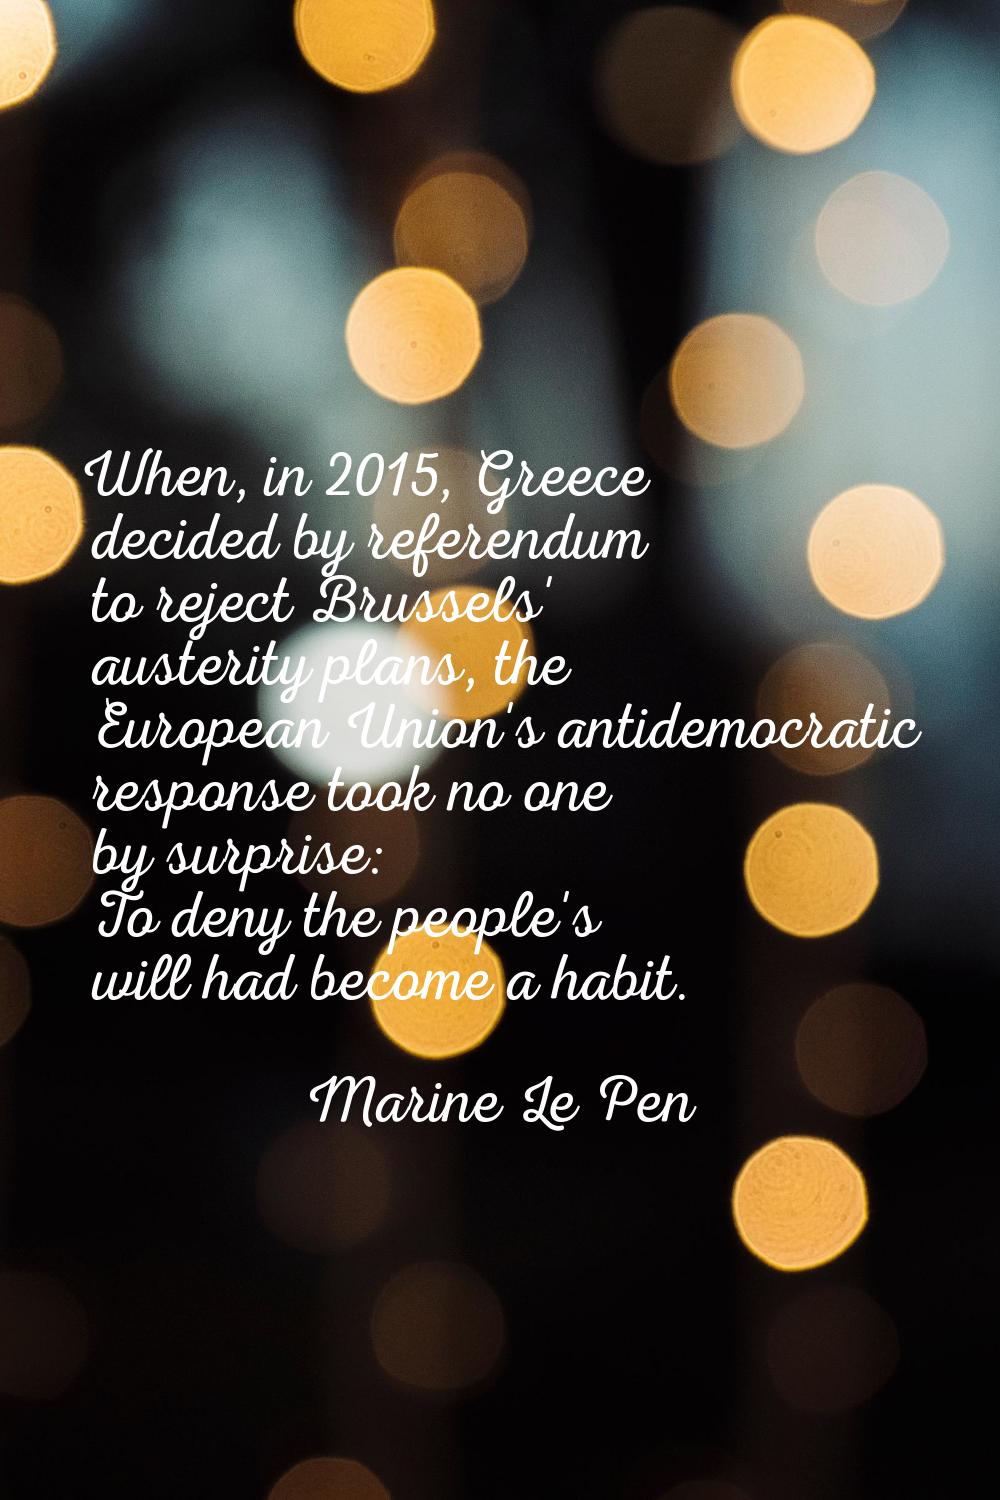 When, in 2015, Greece decided by referendum to reject Brussels' austerity plans, the European Union